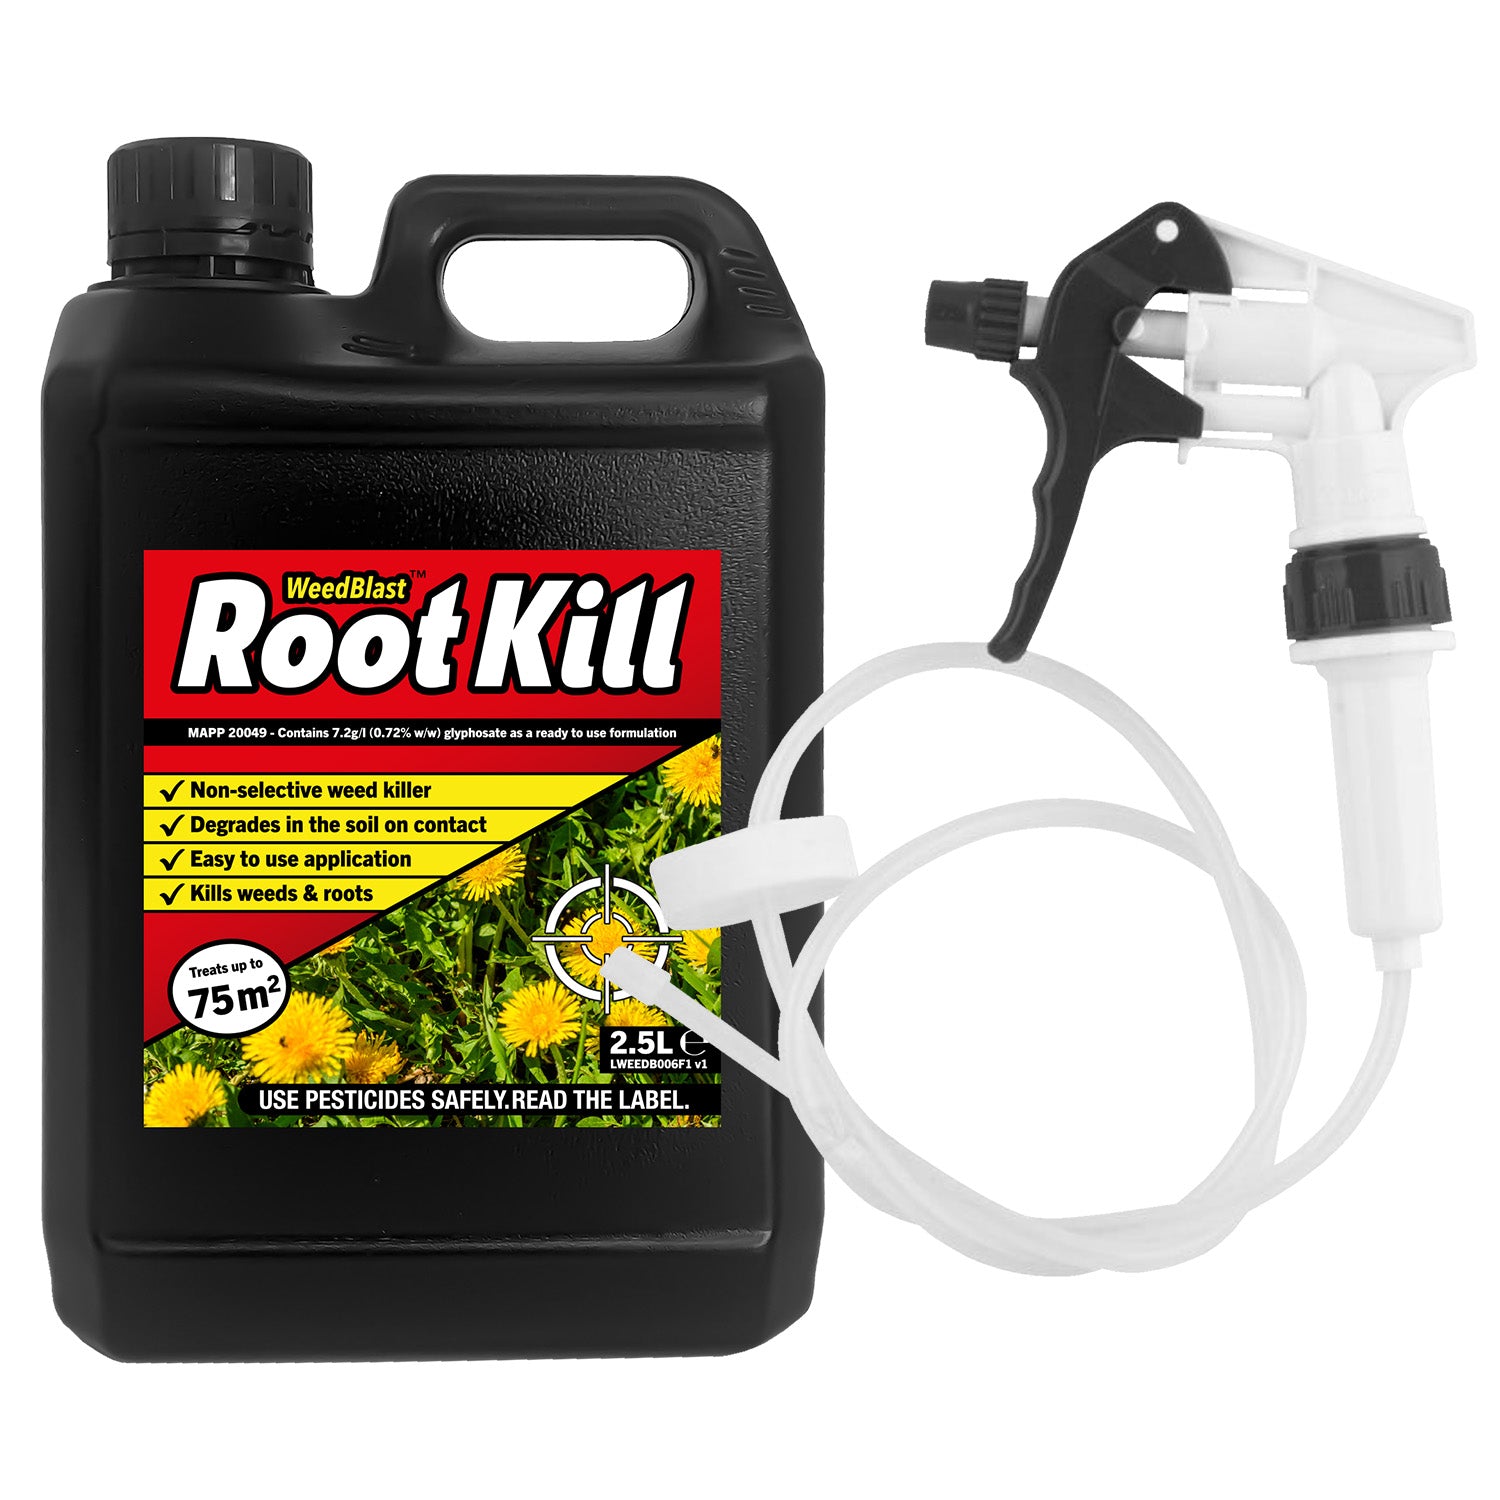 Weedblast RootKill Glyphosate Weedkiller 2.5 Litre, Ready to use with Long Hose Trigger